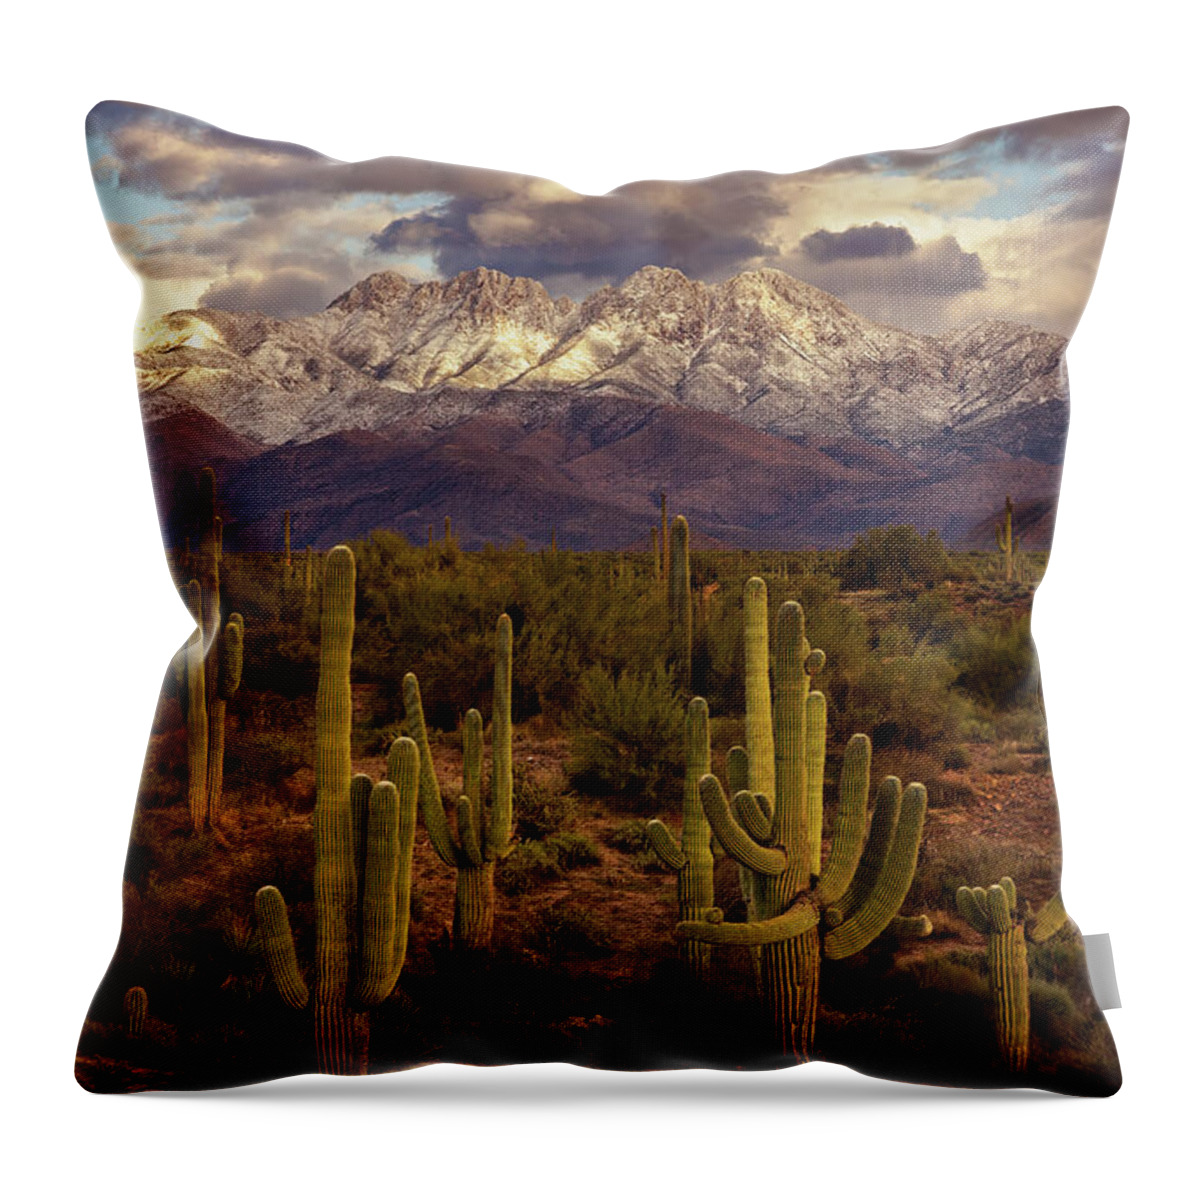 Art Throw Pillow featuring the photograph Snowy Dreams by Rick Furmanek